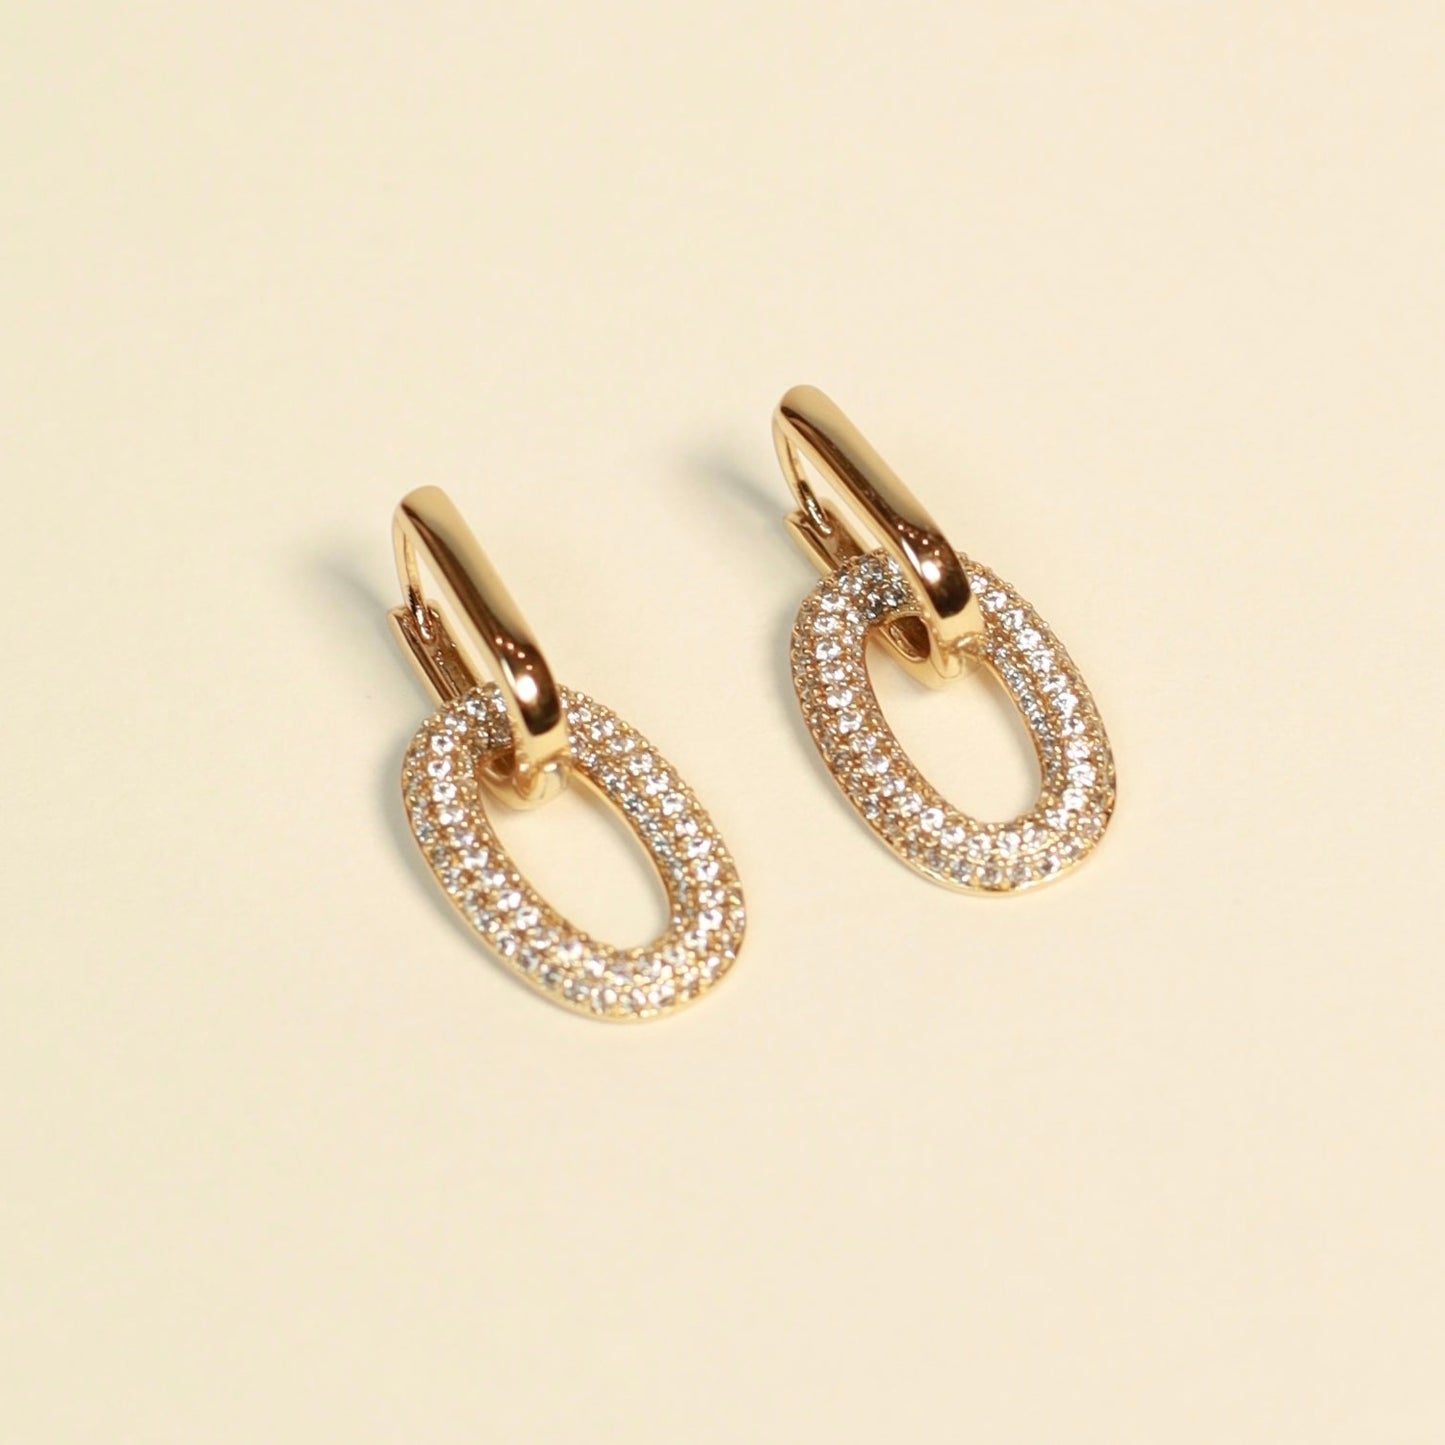 Link gold earrings with zirconias